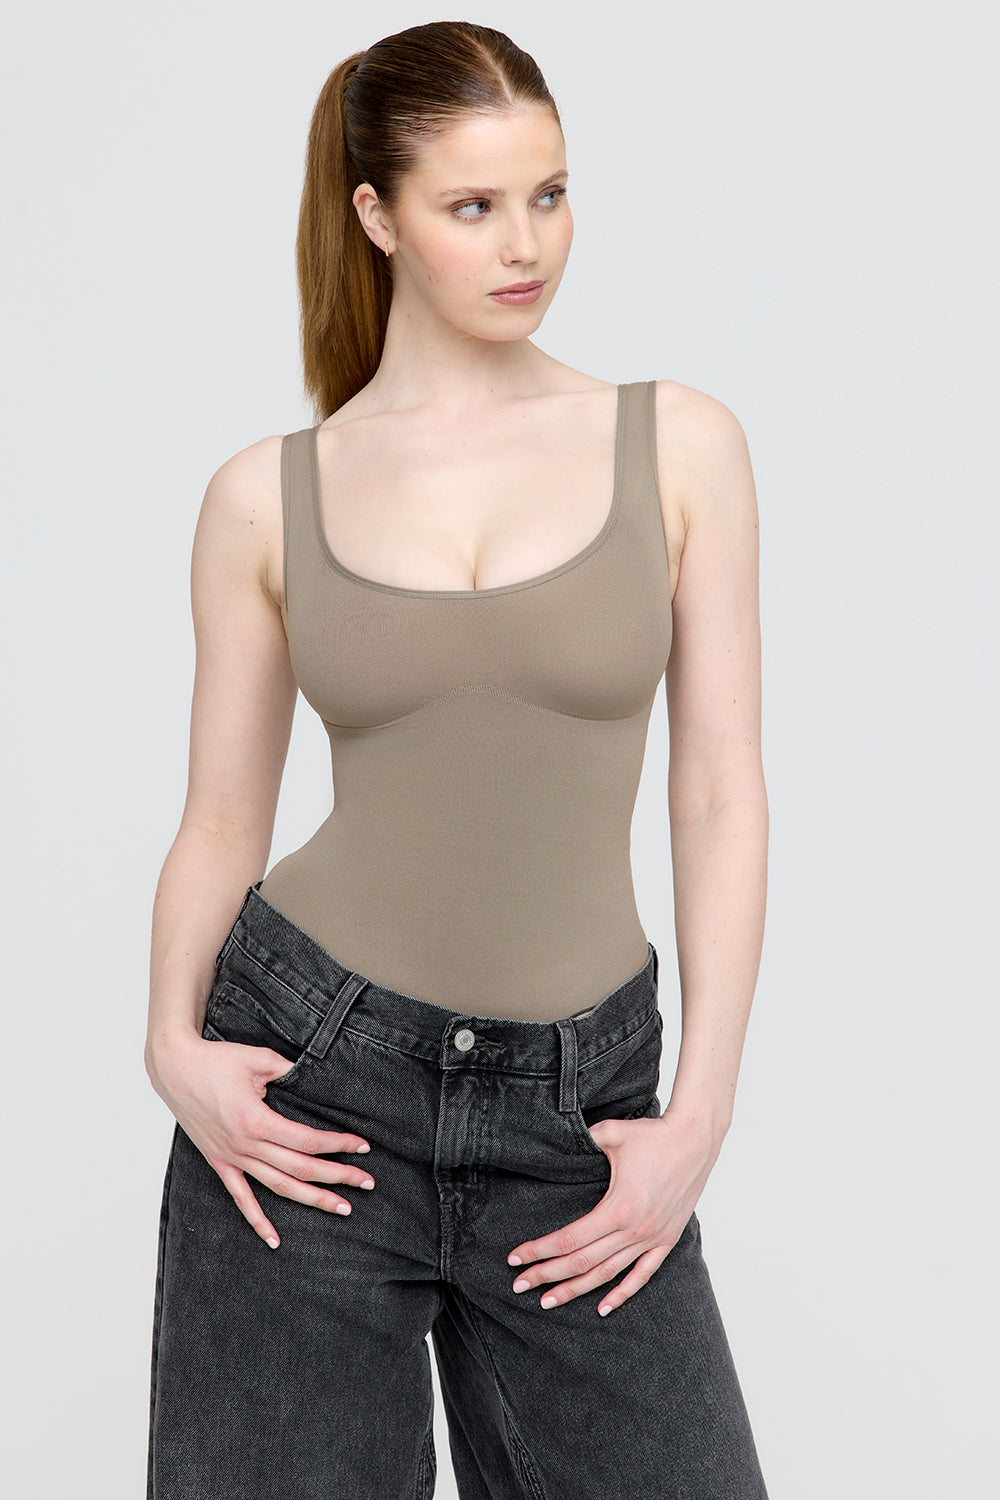 STONE Ribbed High Neck Cut Out Bodysuit, Womens Tops